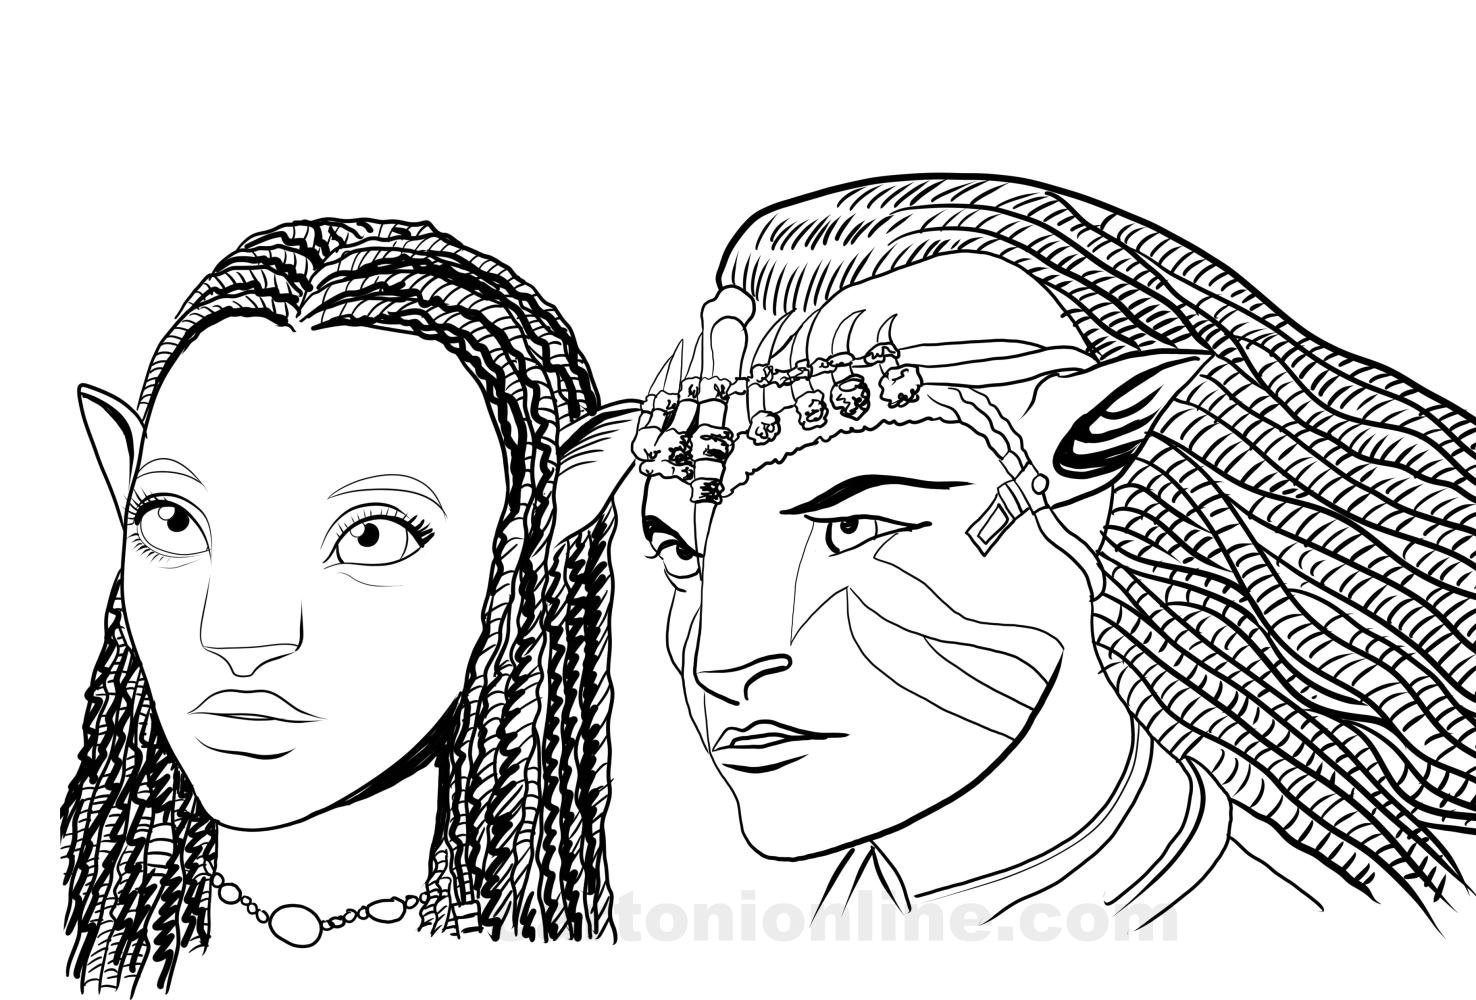 Jake Sully e Neytiri - Avatar 2  coloring pages to print and coloring